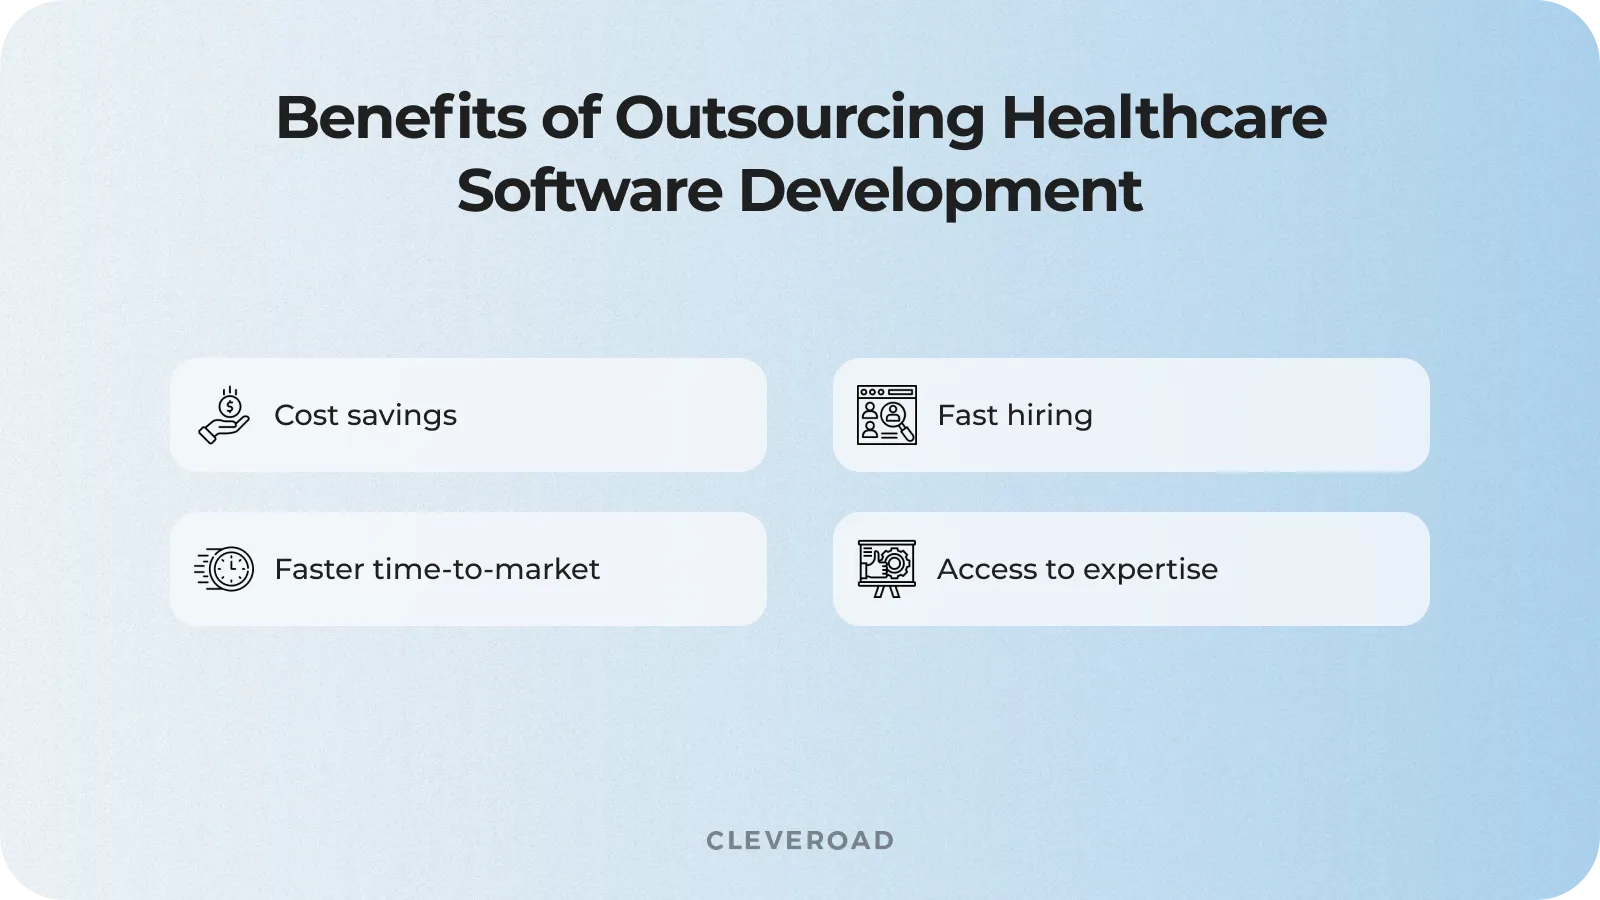 Benefits of outsourcing healthcare software development